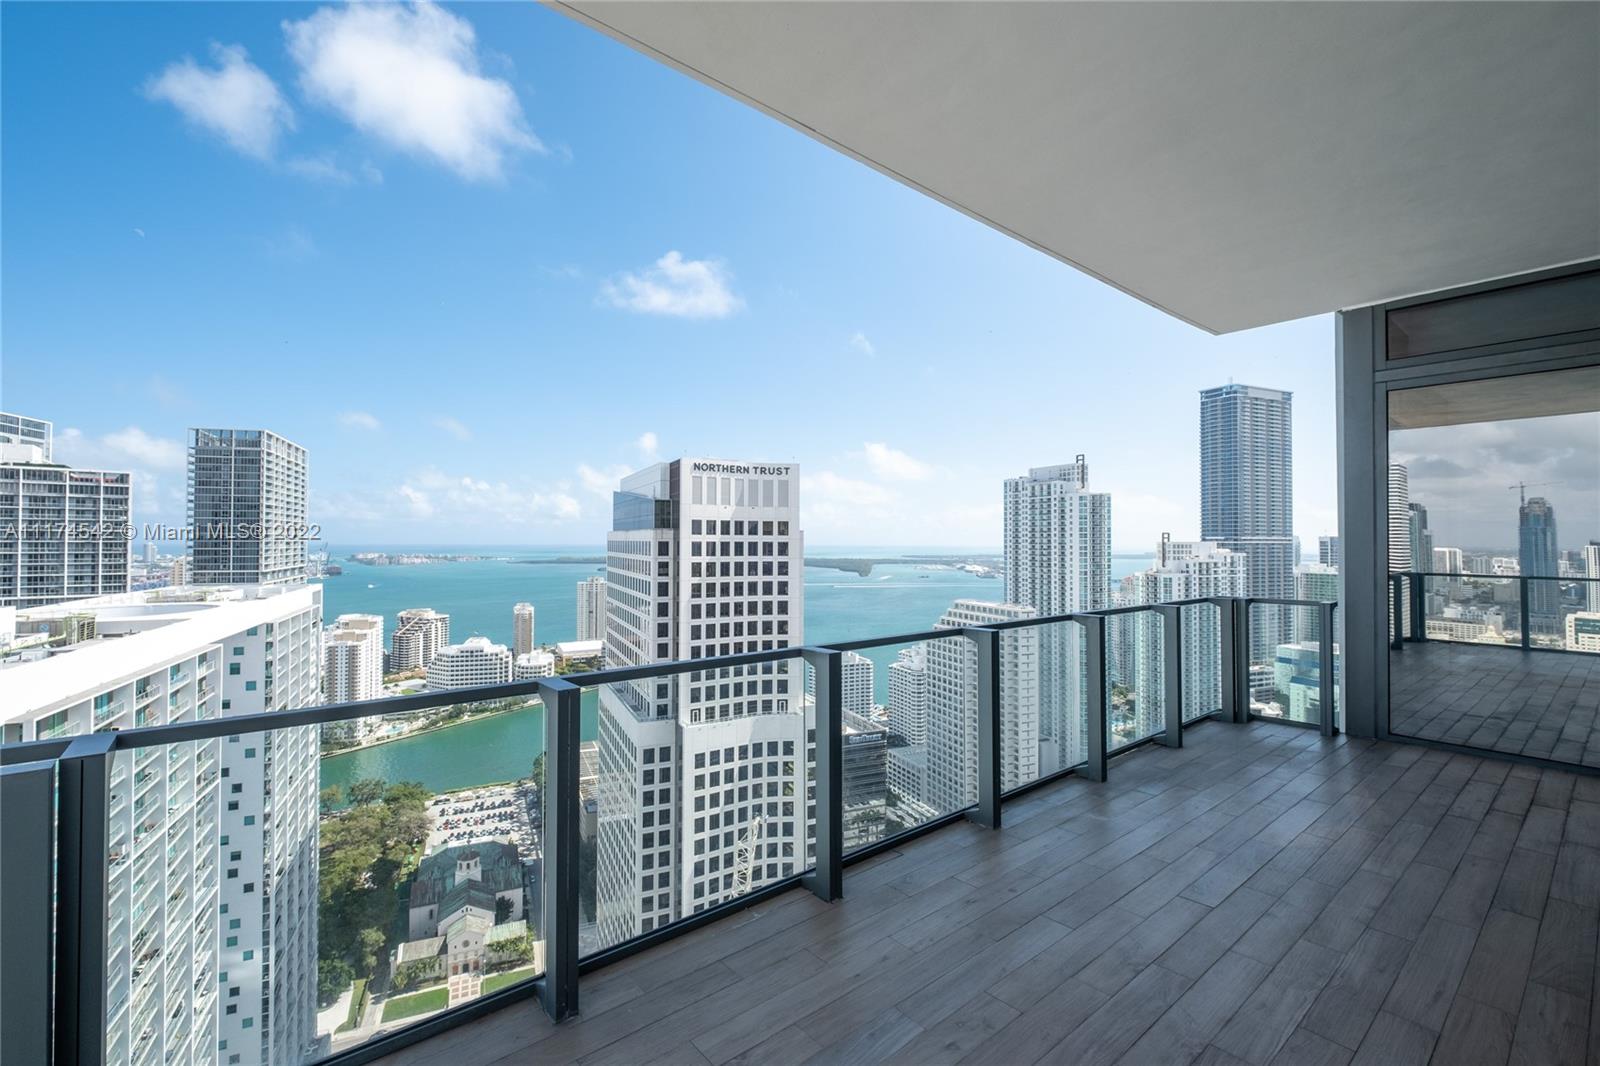 Magnificent and luxurious unit in desirable Reach at Brickell City Center. Dazzling city and water views views, Floor-to-ceiling sliding glass doors, modern Italian kitchen cabinets with cooking island, quartz stone counter top, Bosch appliances, gorgeous marble floors, oversize built in closet and electric shades. Enjoy half-acre amenity deck including tropical gardens, barbecue grills, outdoor fitness areas, kids playground, heated lap and social pools with spa, fitness center & more.